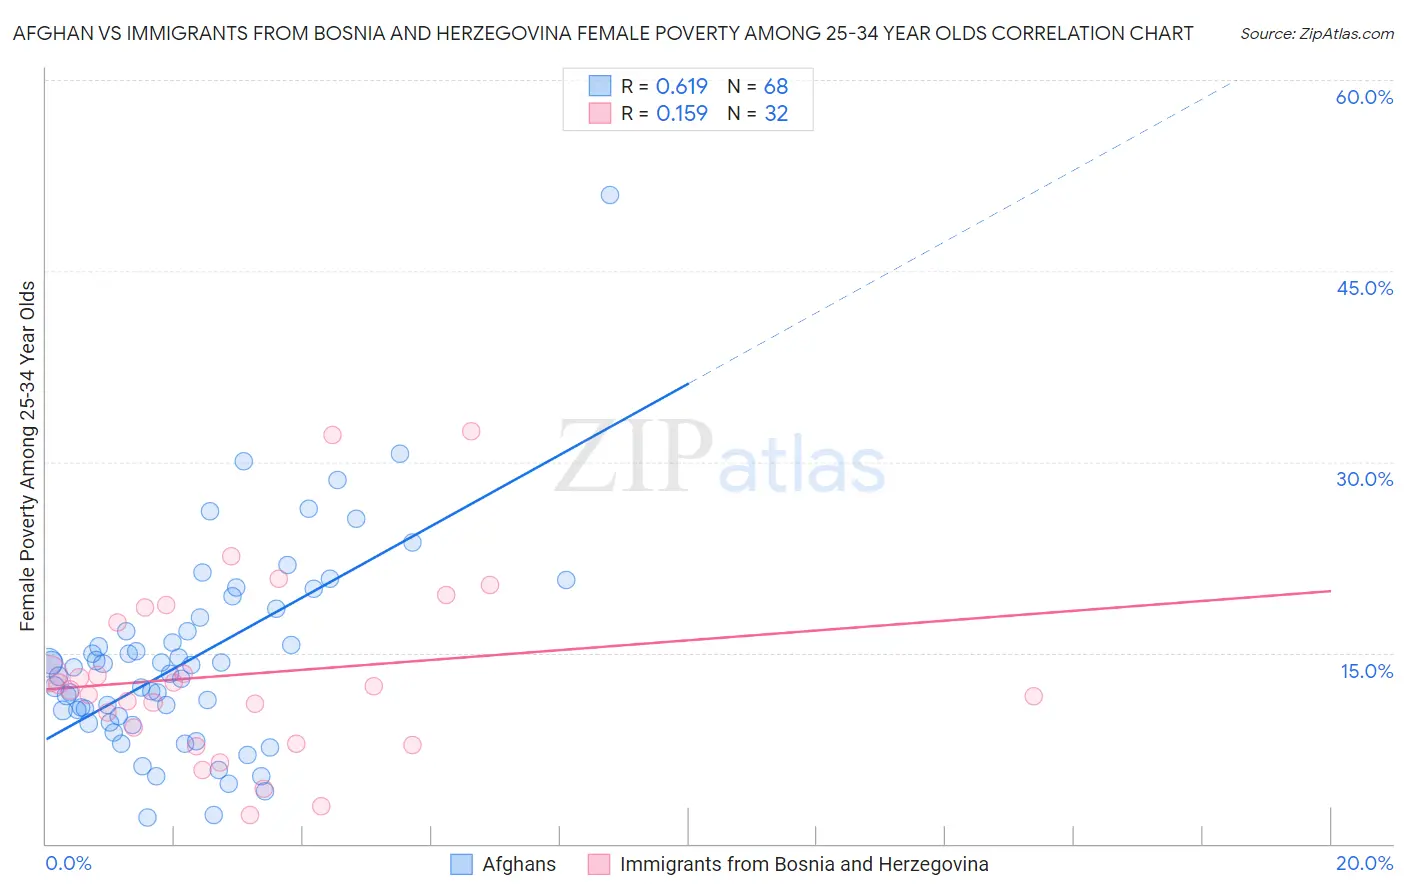 Afghan vs Immigrants from Bosnia and Herzegovina Female Poverty Among 25-34 Year Olds